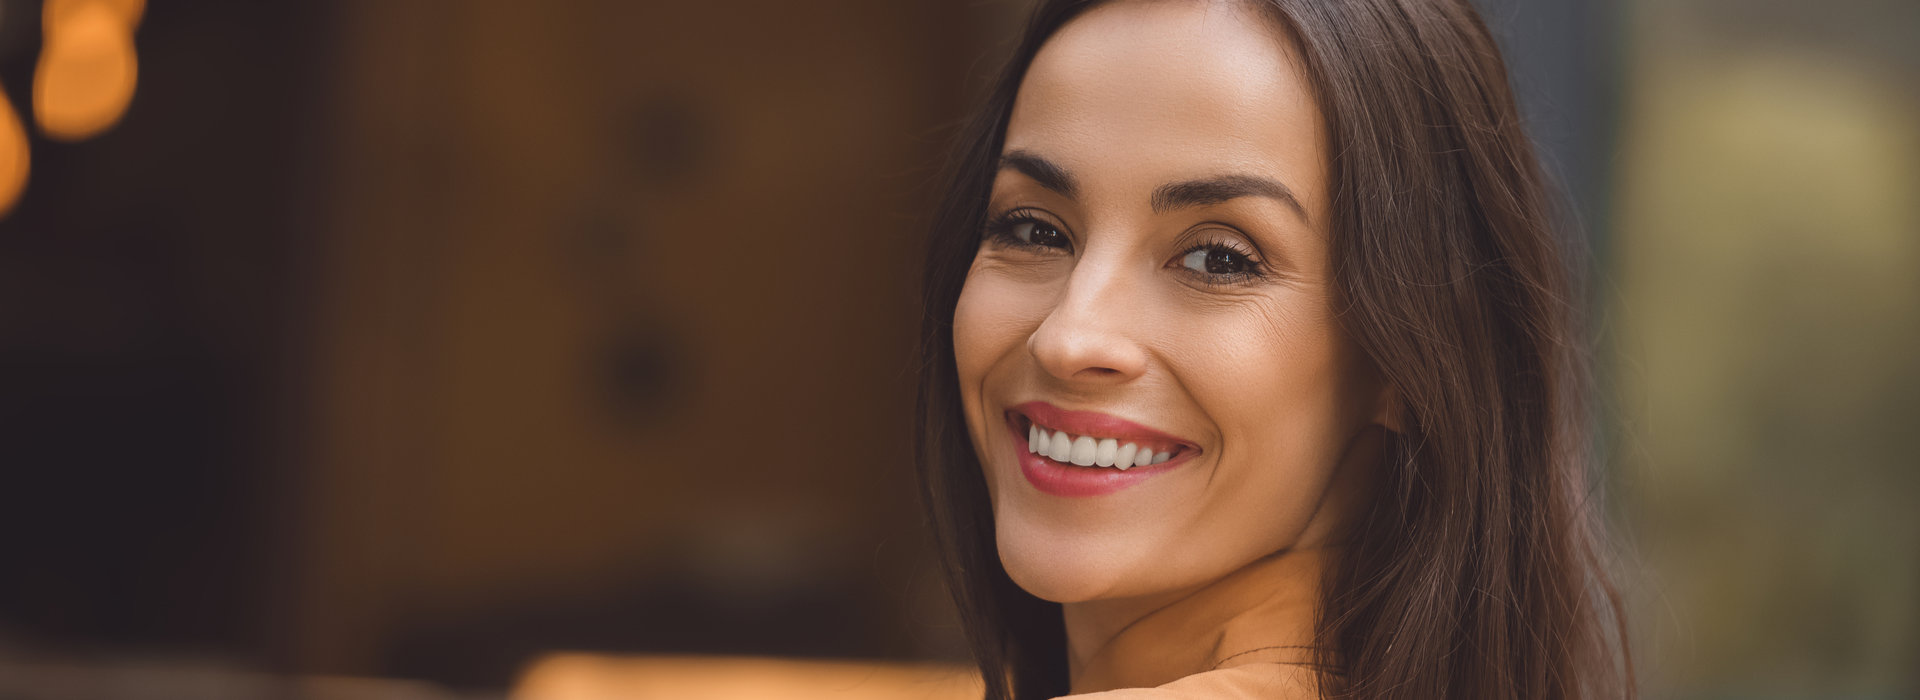 A woman is smiling after orthodontic appliances.